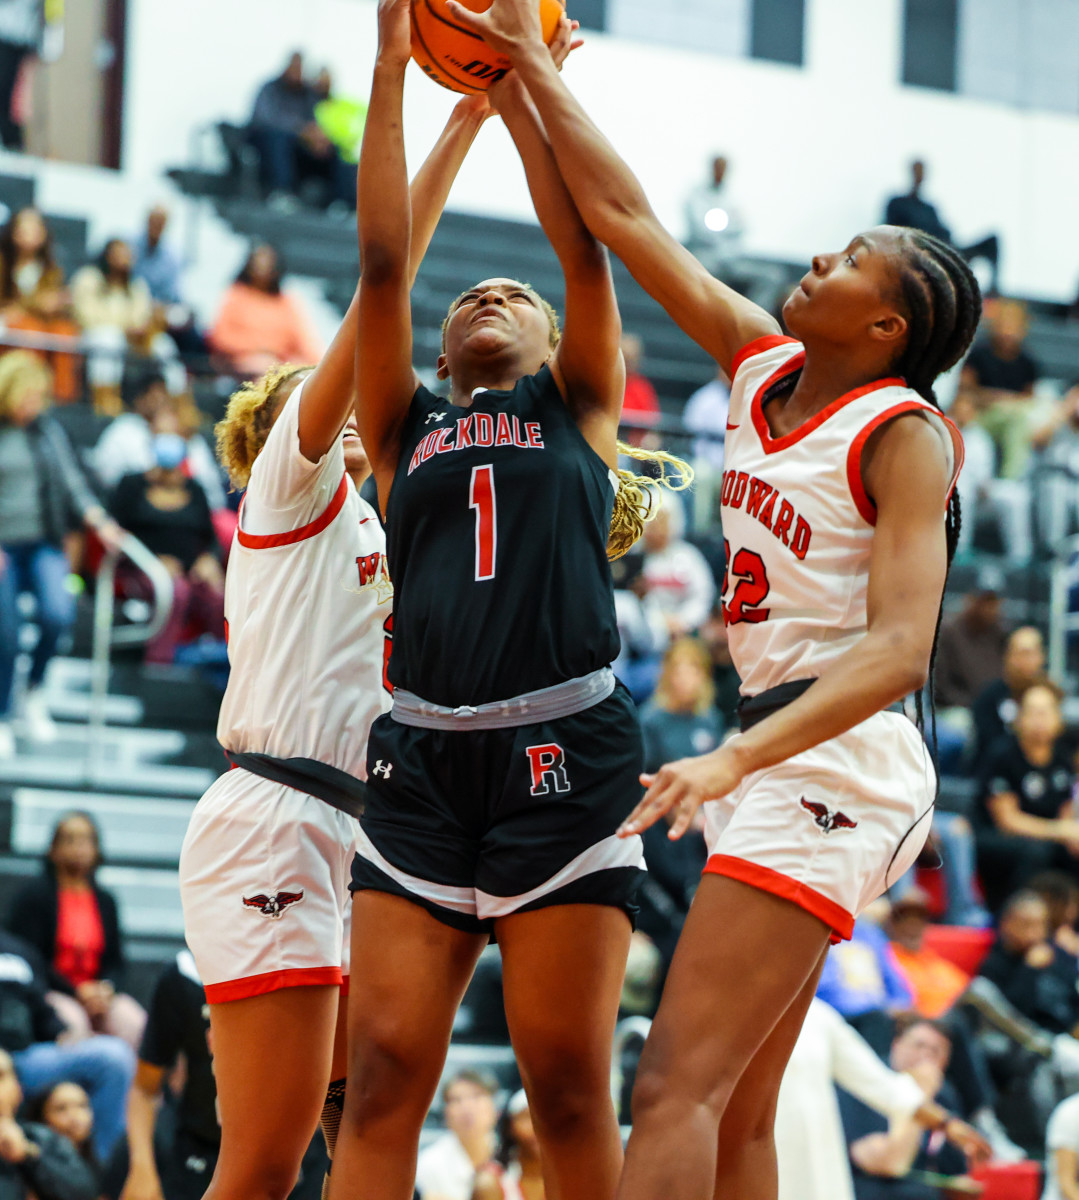 Rockdale County's Madison Presha (1) fights through a double team to get off a shot against Woodward Academy. She scored 13 points in the win.